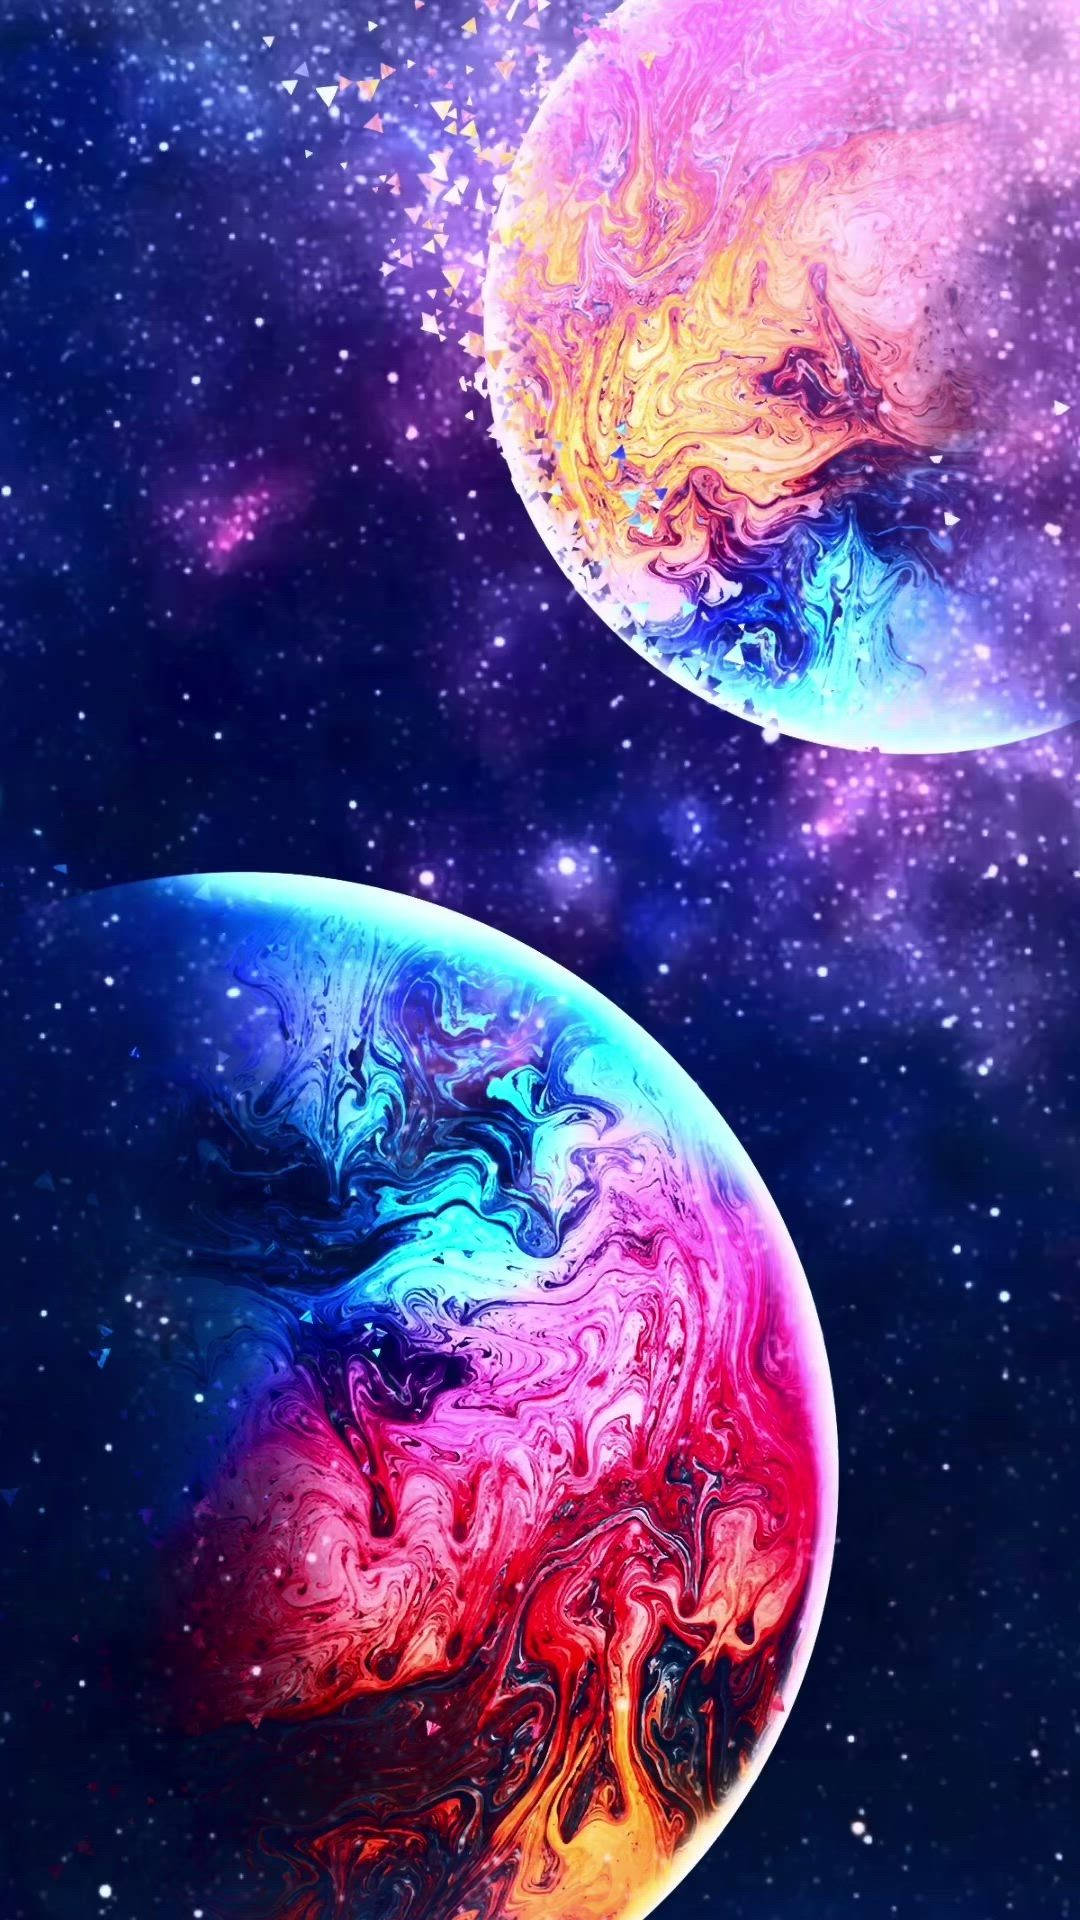 Galaxy Wallpaper for mobile phone tablet desktop computer and other  devices HD and 4K wallpapers  Unicorn wallpaper cute Unicorn wallpaper Galaxy  wallpaper